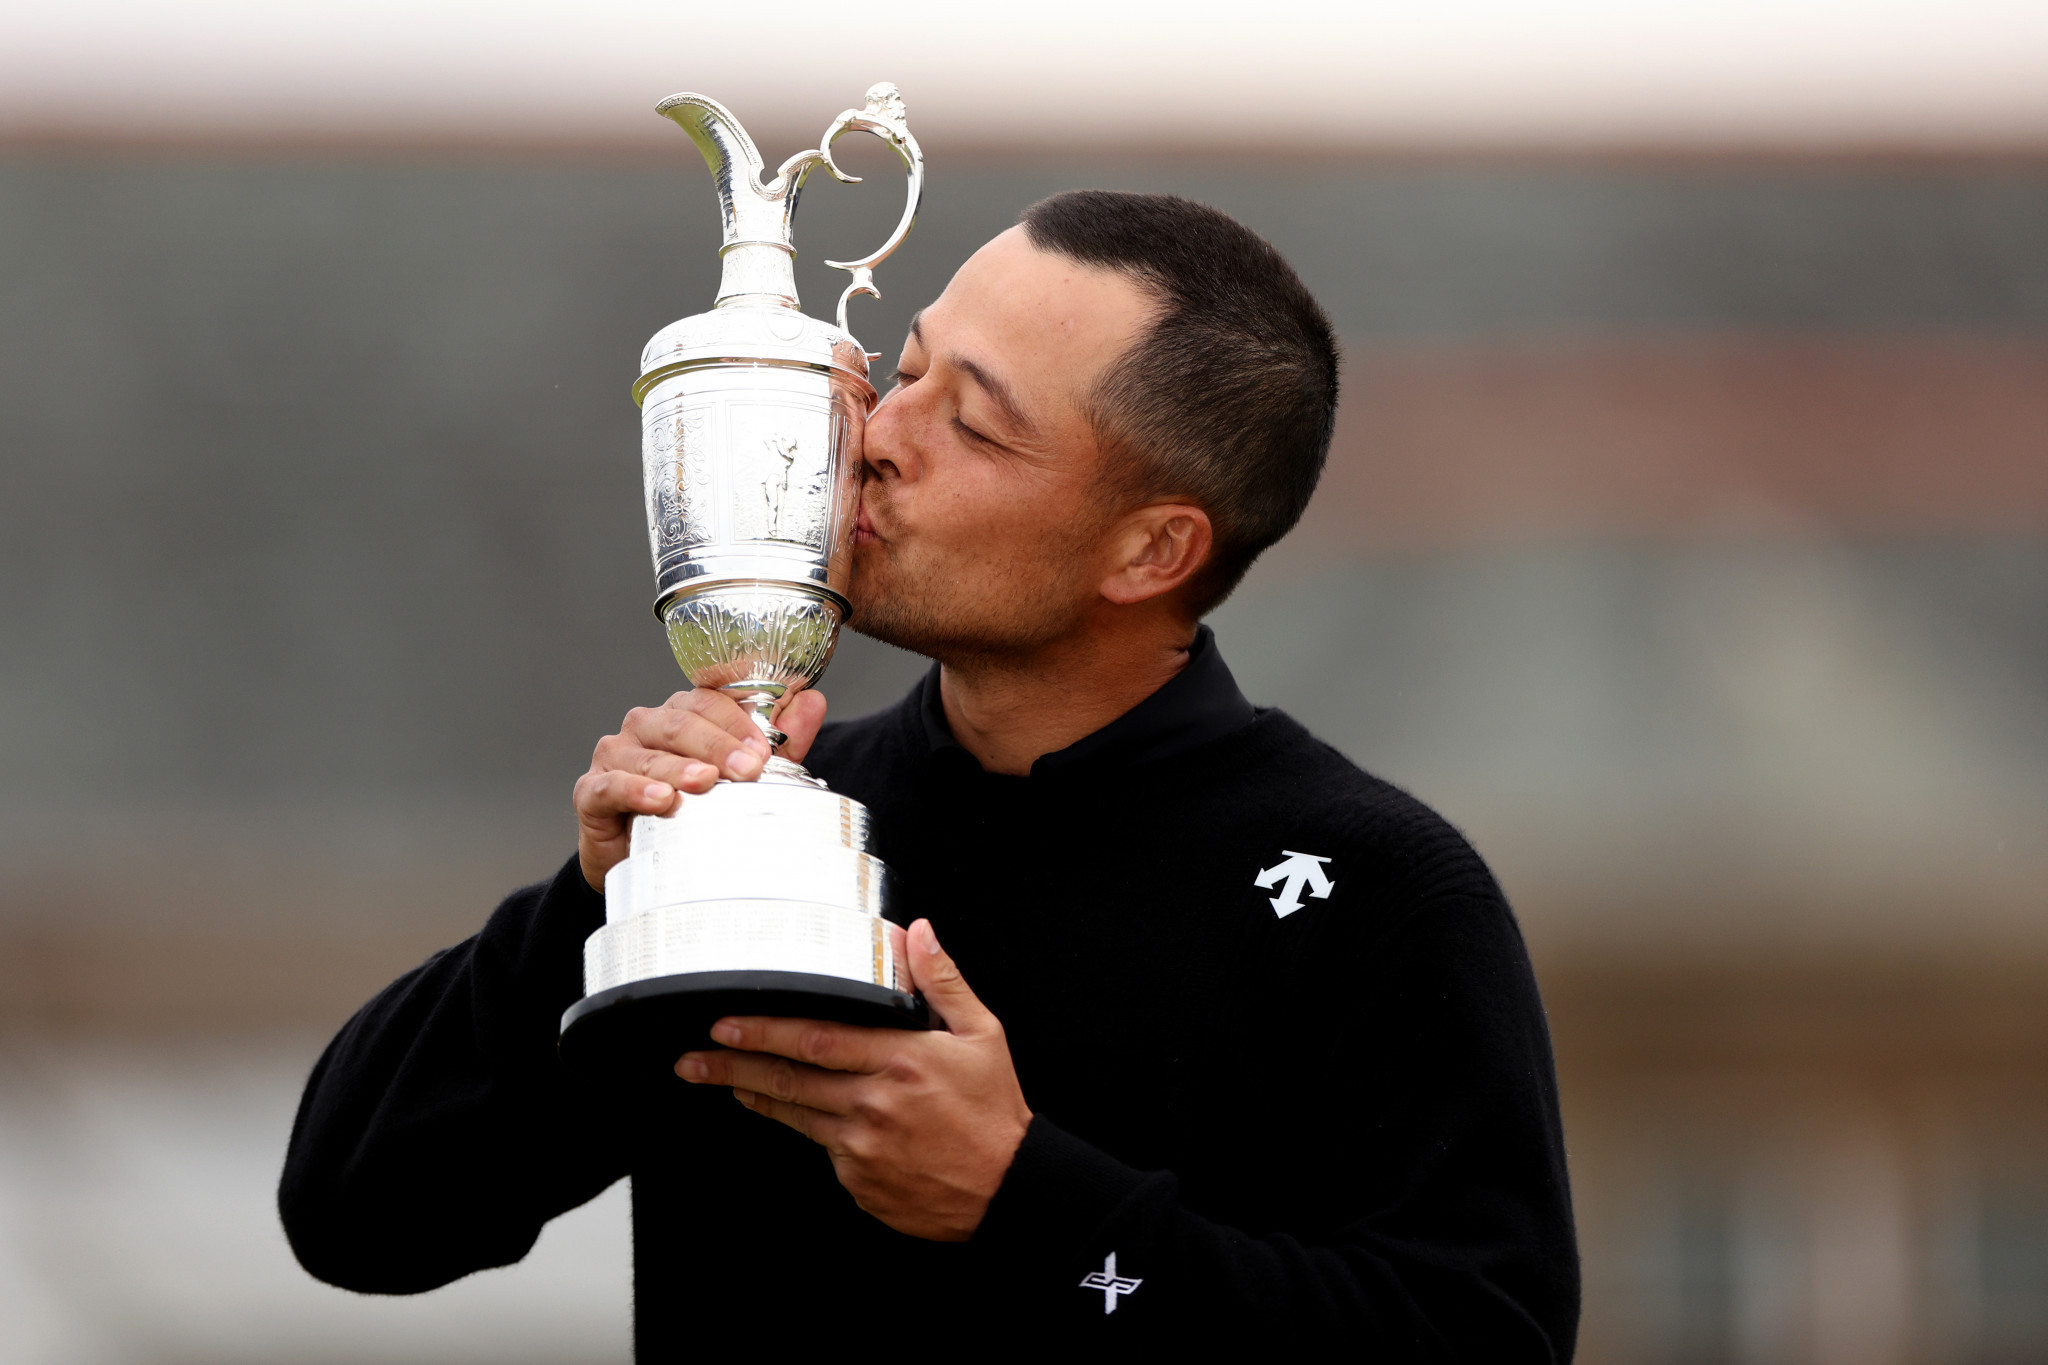 Xander Schauffele got his hands on the famed Claret Jug after winning the British Open. GETTY IMAGES